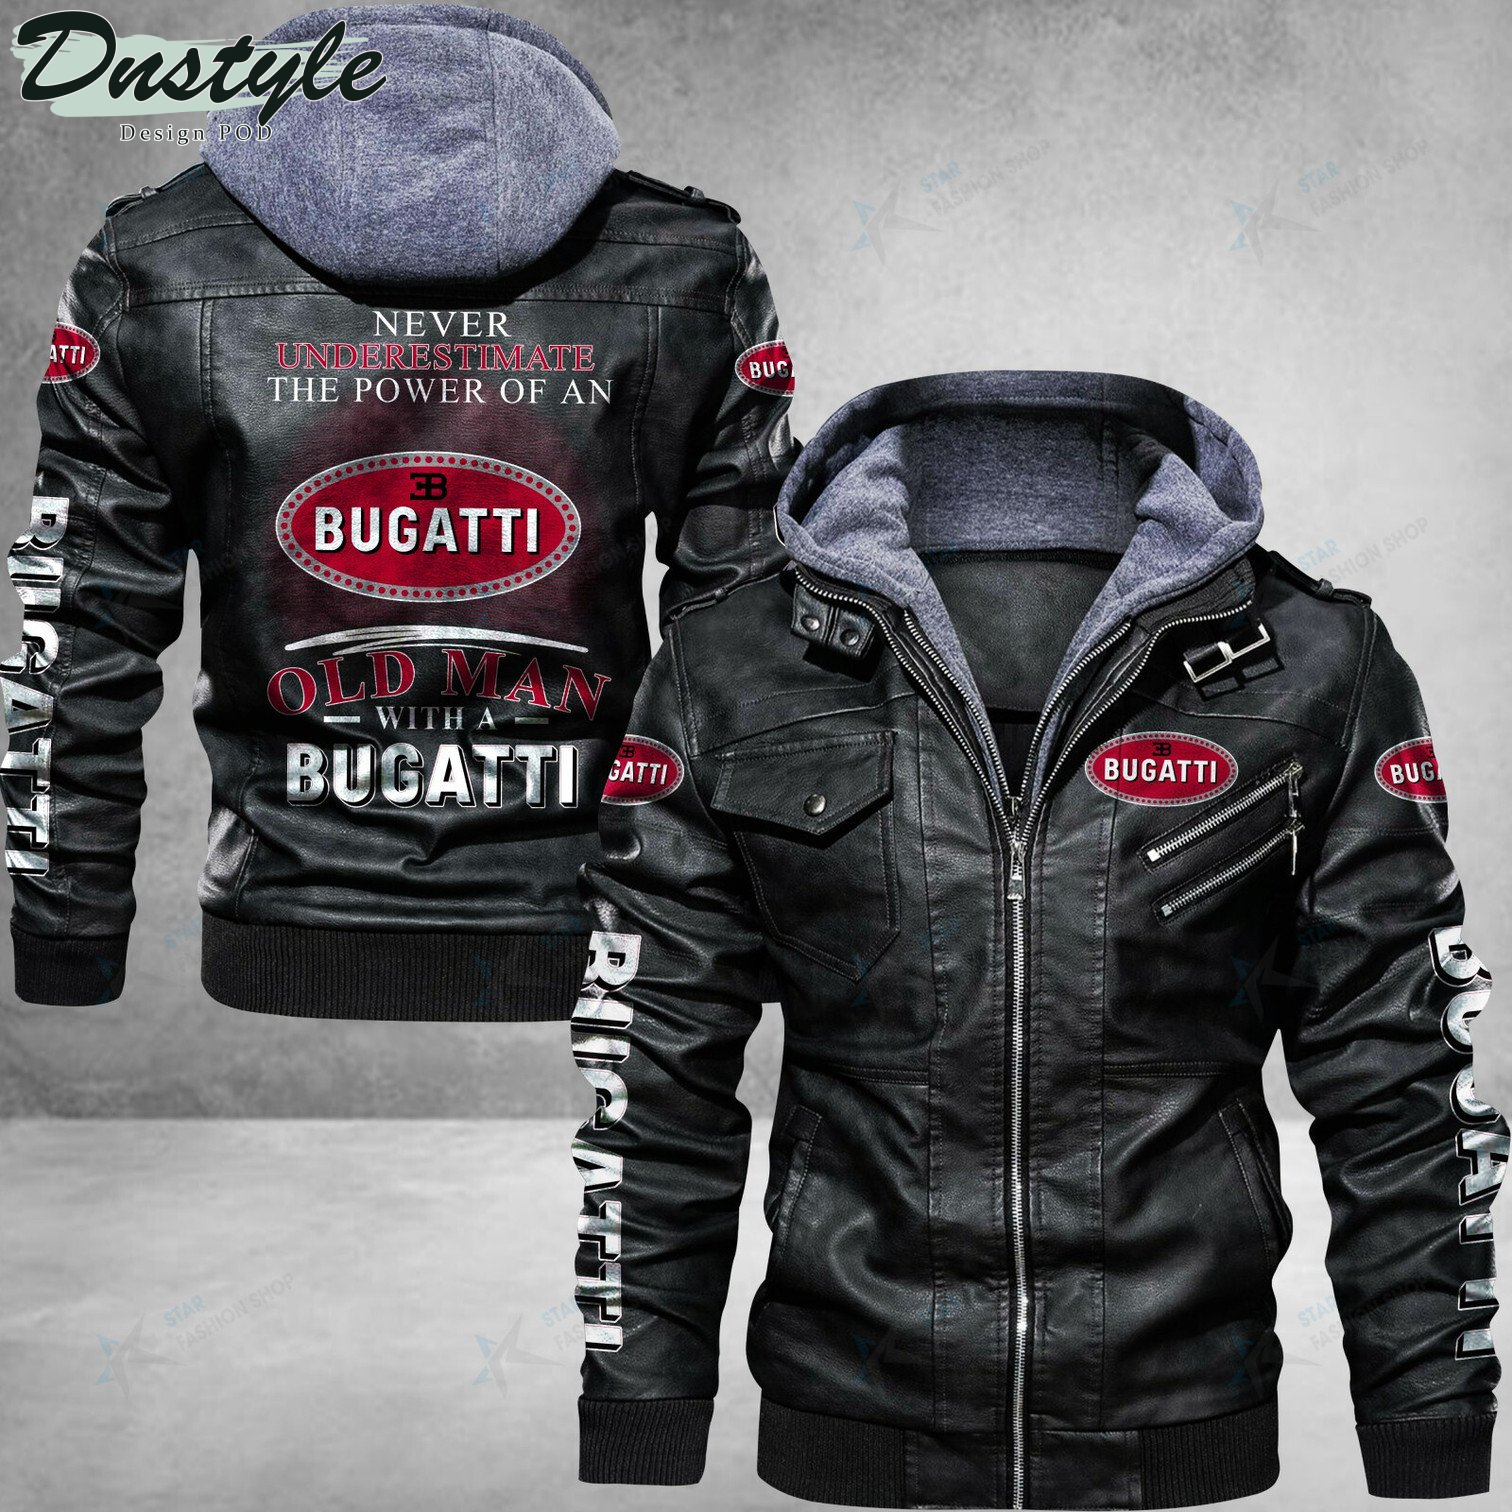 Bugati never underestimate the power of an old man leather jacket